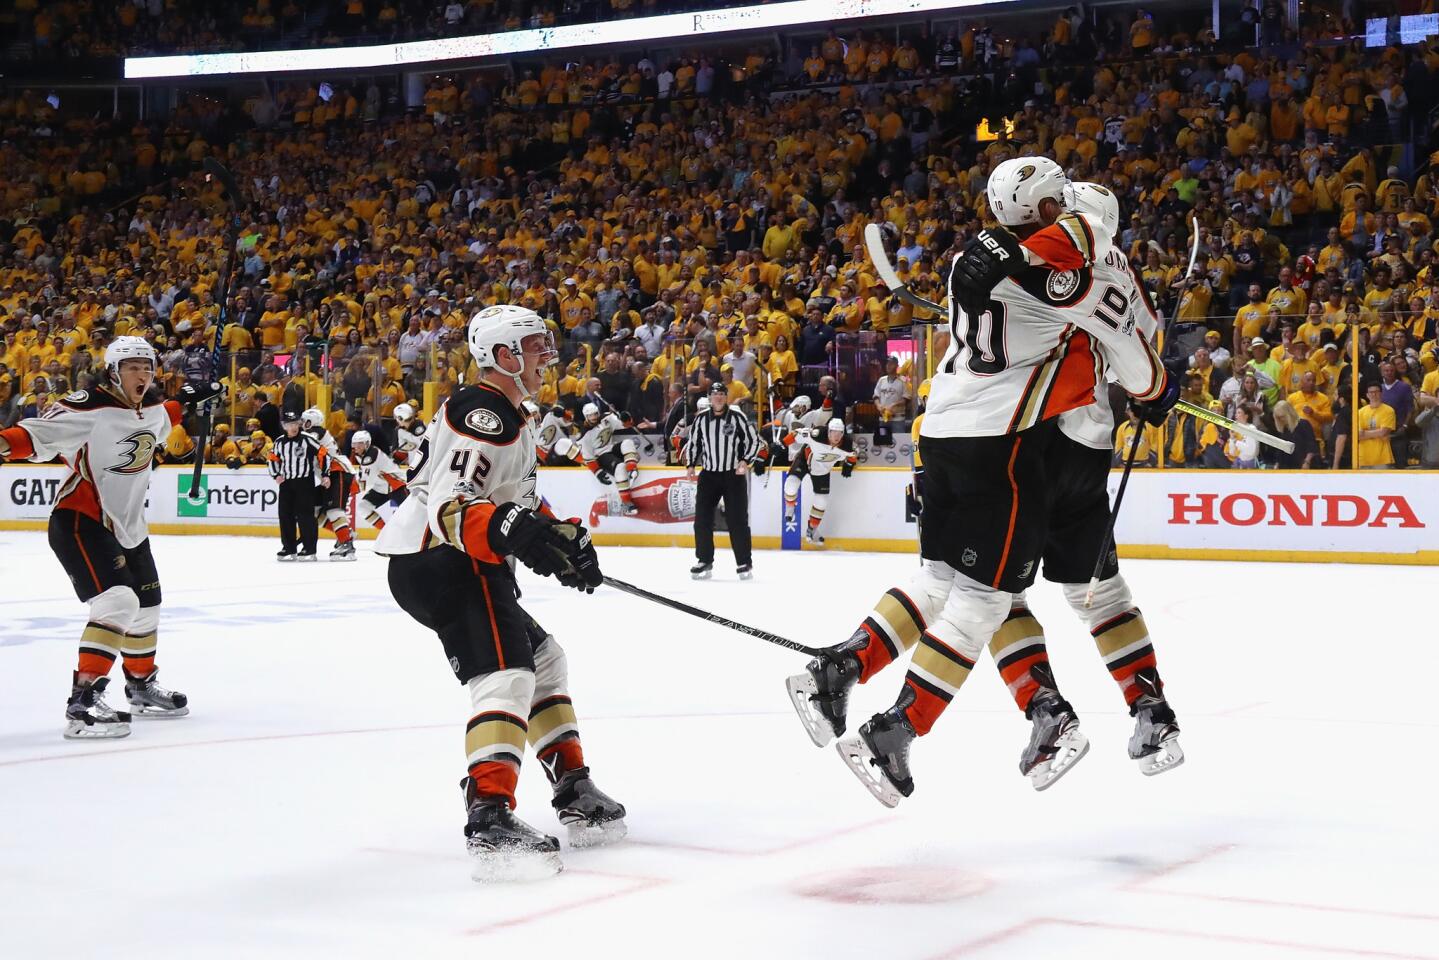 Ducks right wing Corey Perry (10) celebrates with teammates after scoring the game-winning goal against the Predators in overtime of Game 4.